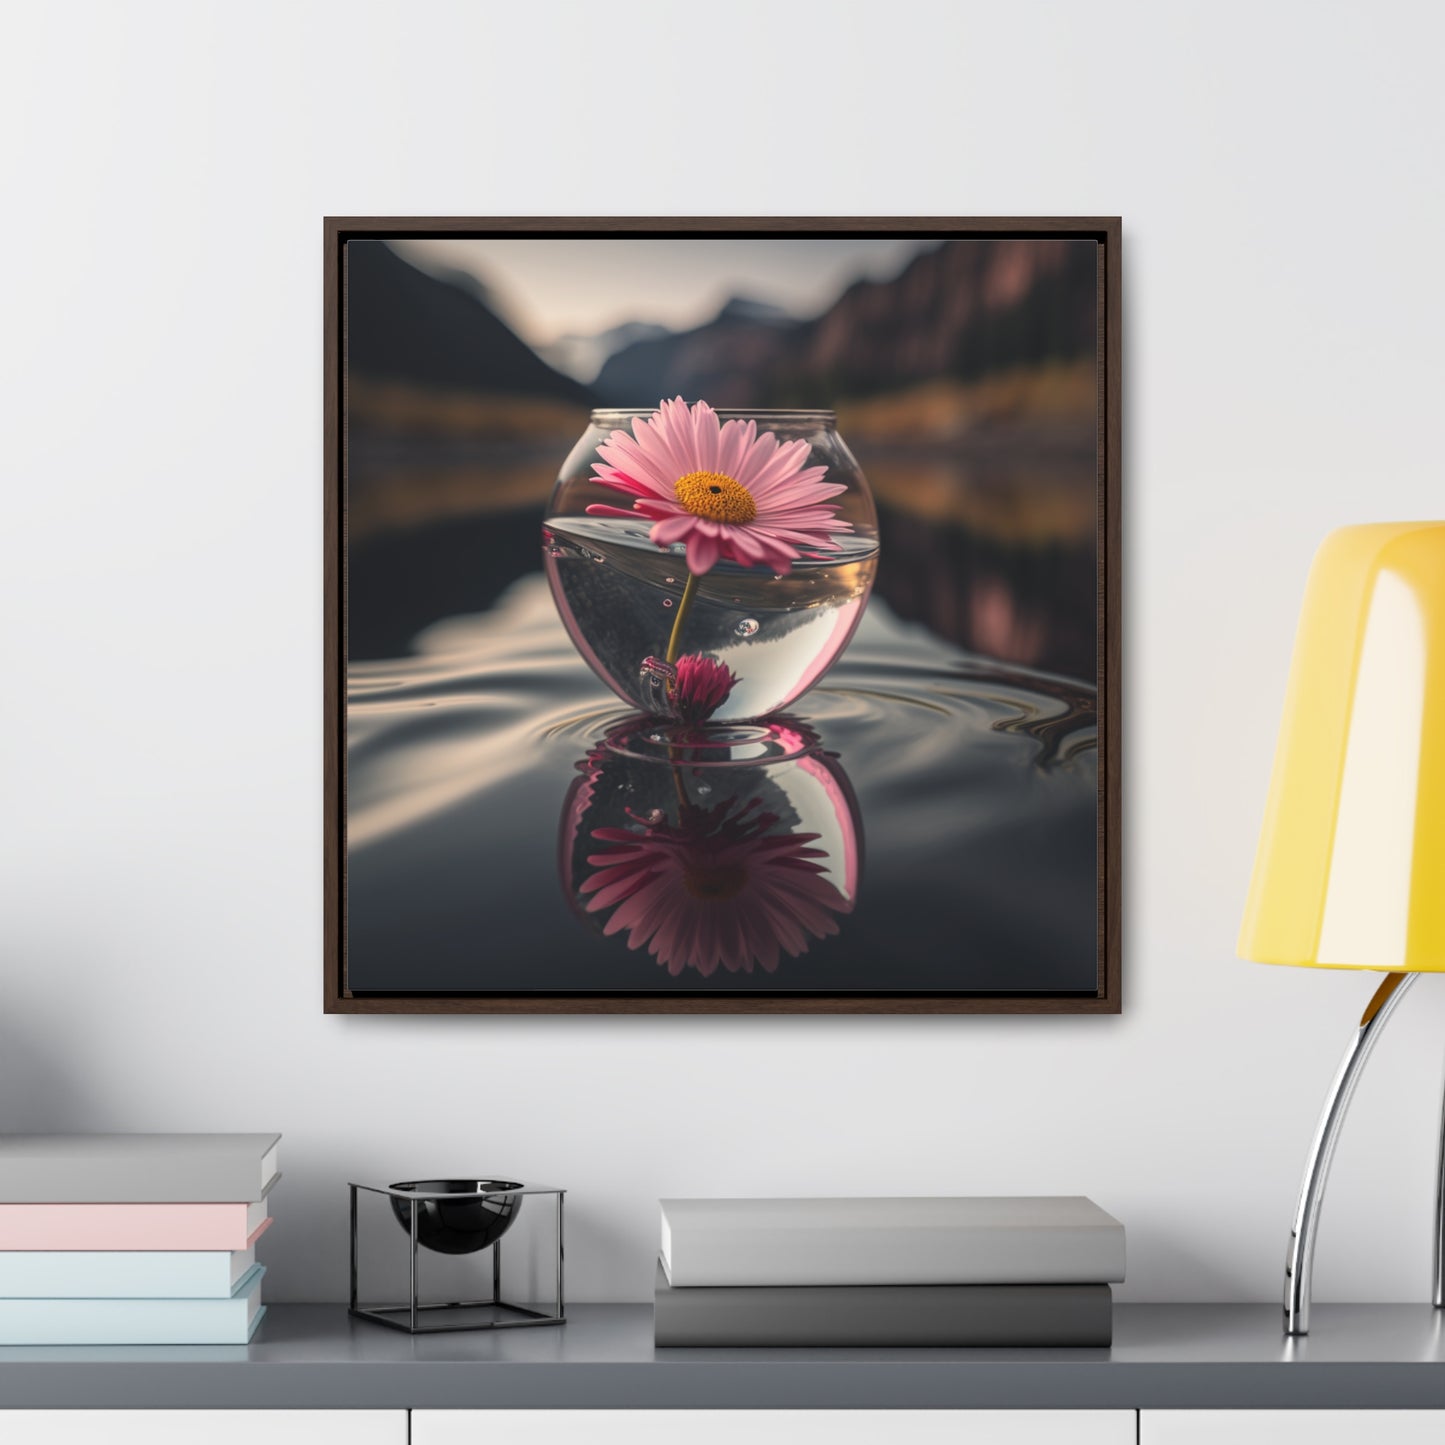 Gallery Canvas Wraps, Square Frame Daisy in a vase 2